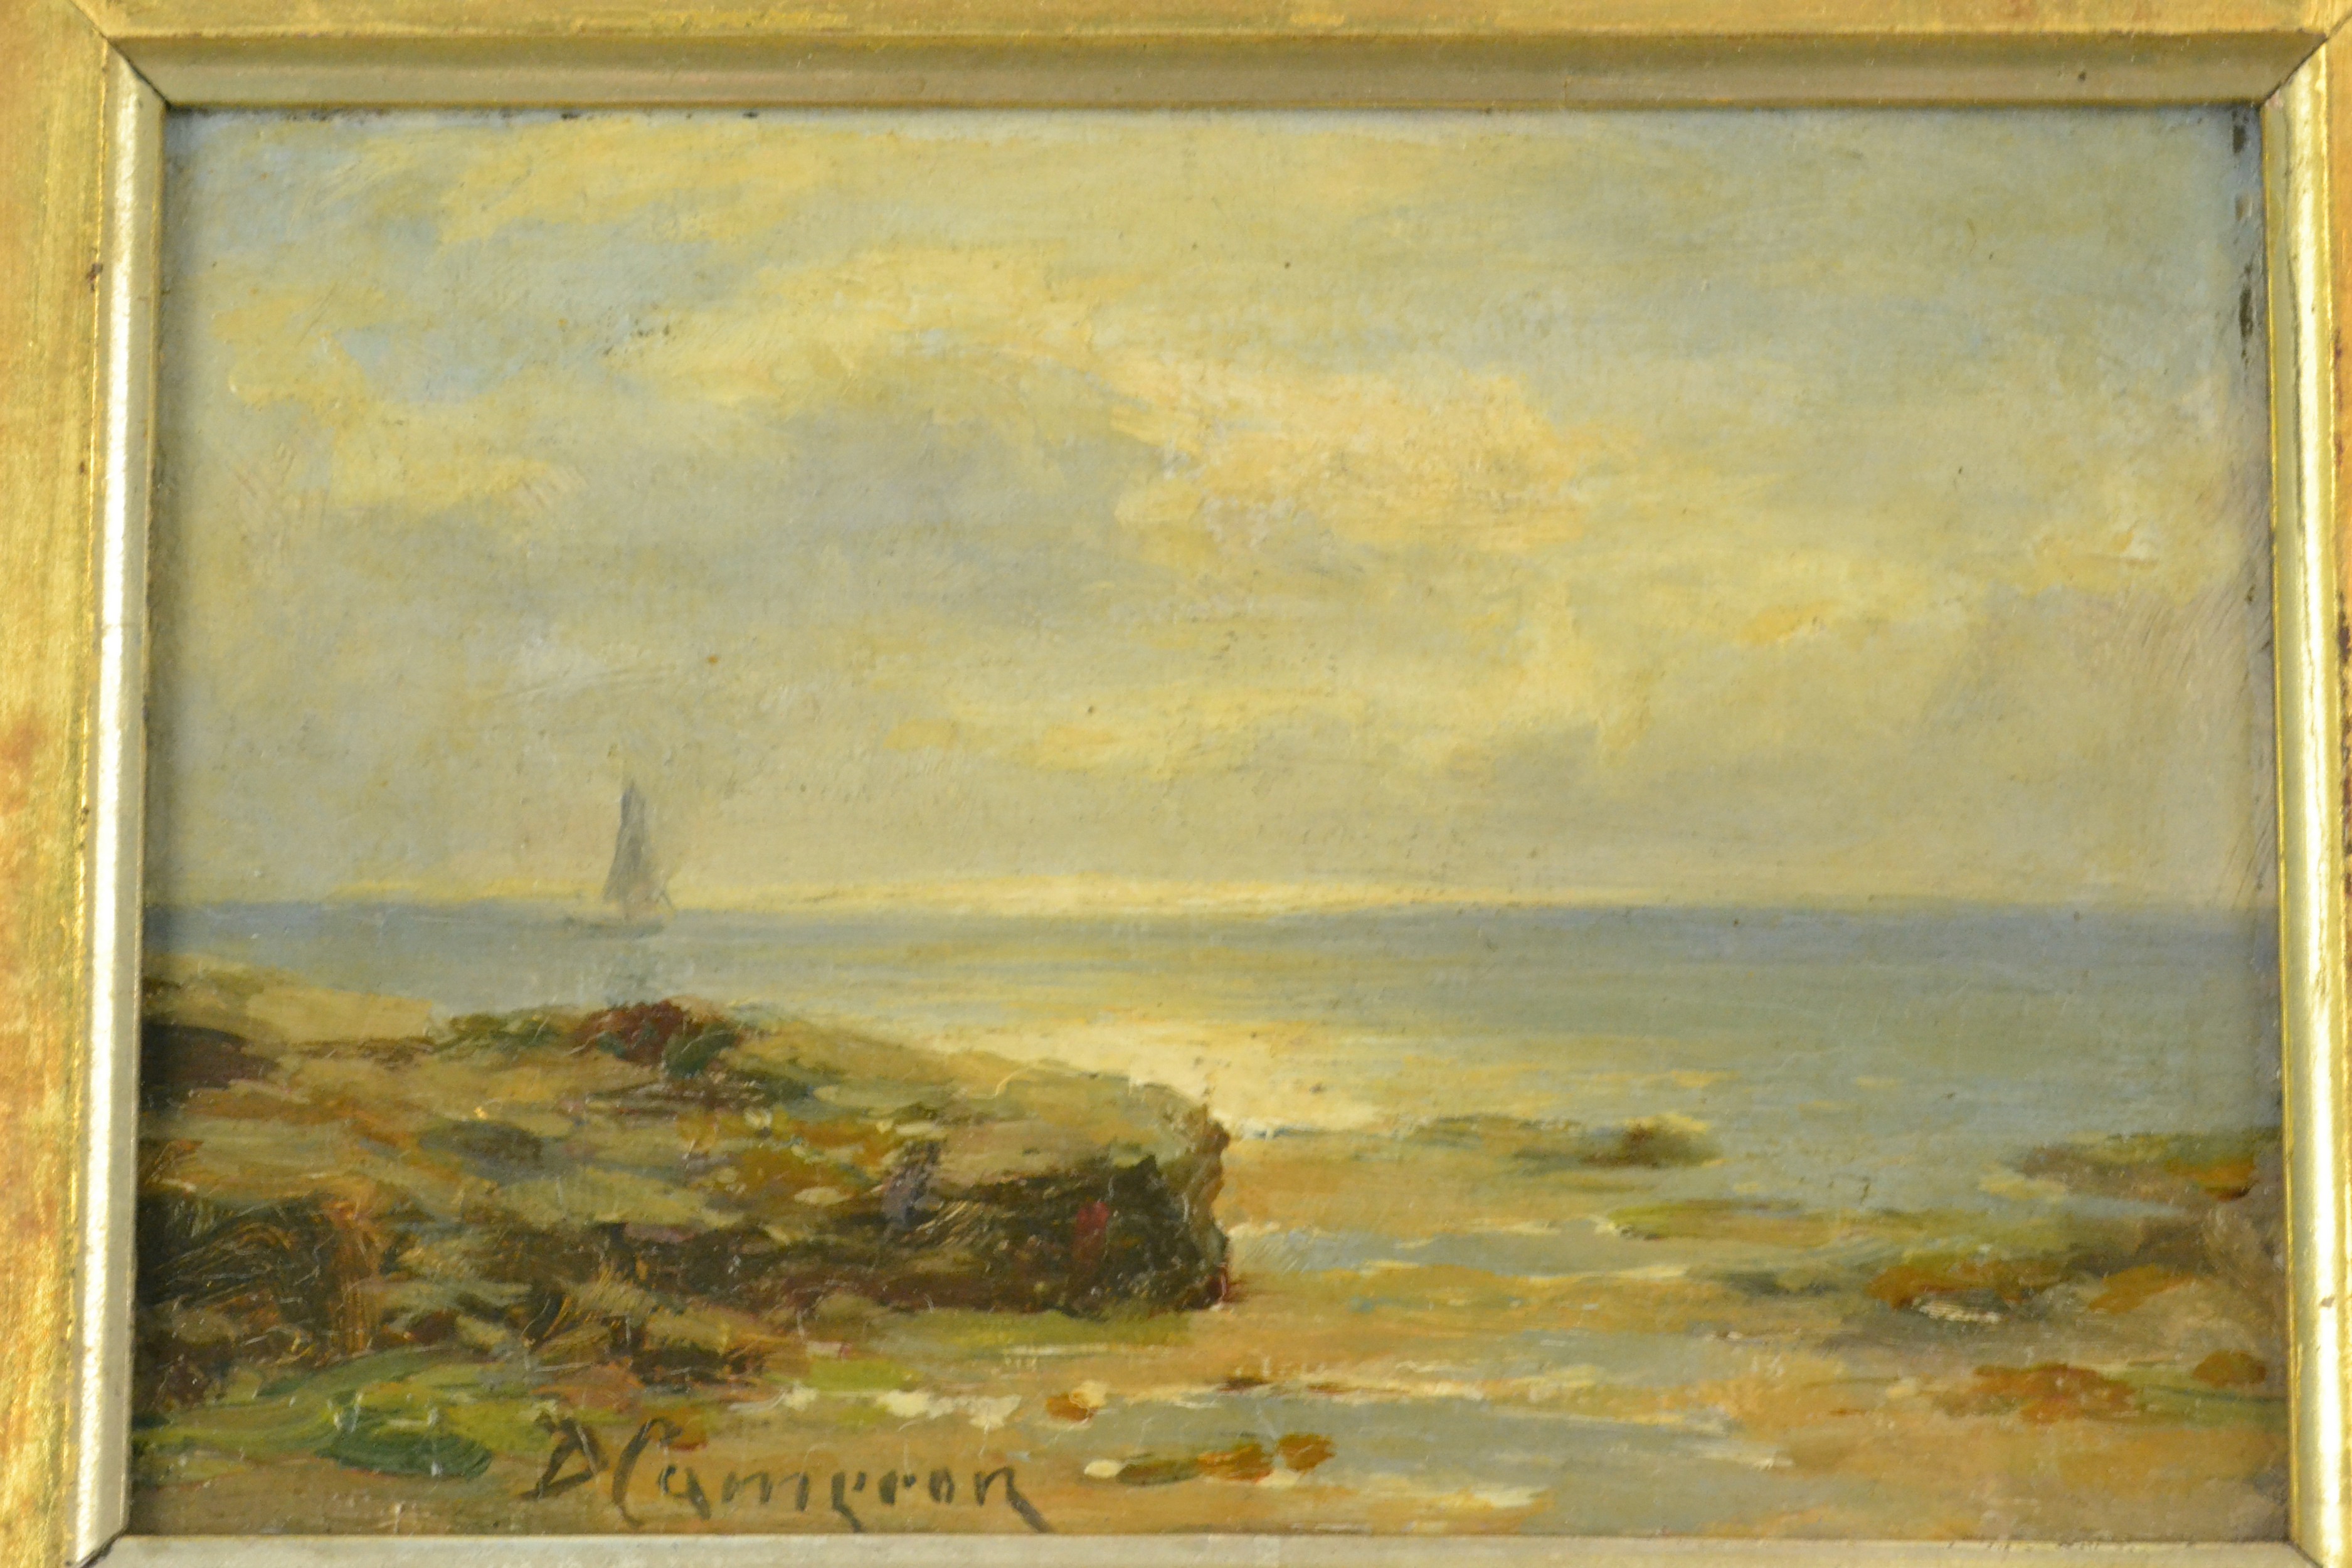 Sir David Young Cameron RA, Scottish Seascape, oil on board, signed, (10.5 x 15cm approx) - Image 3 of 4